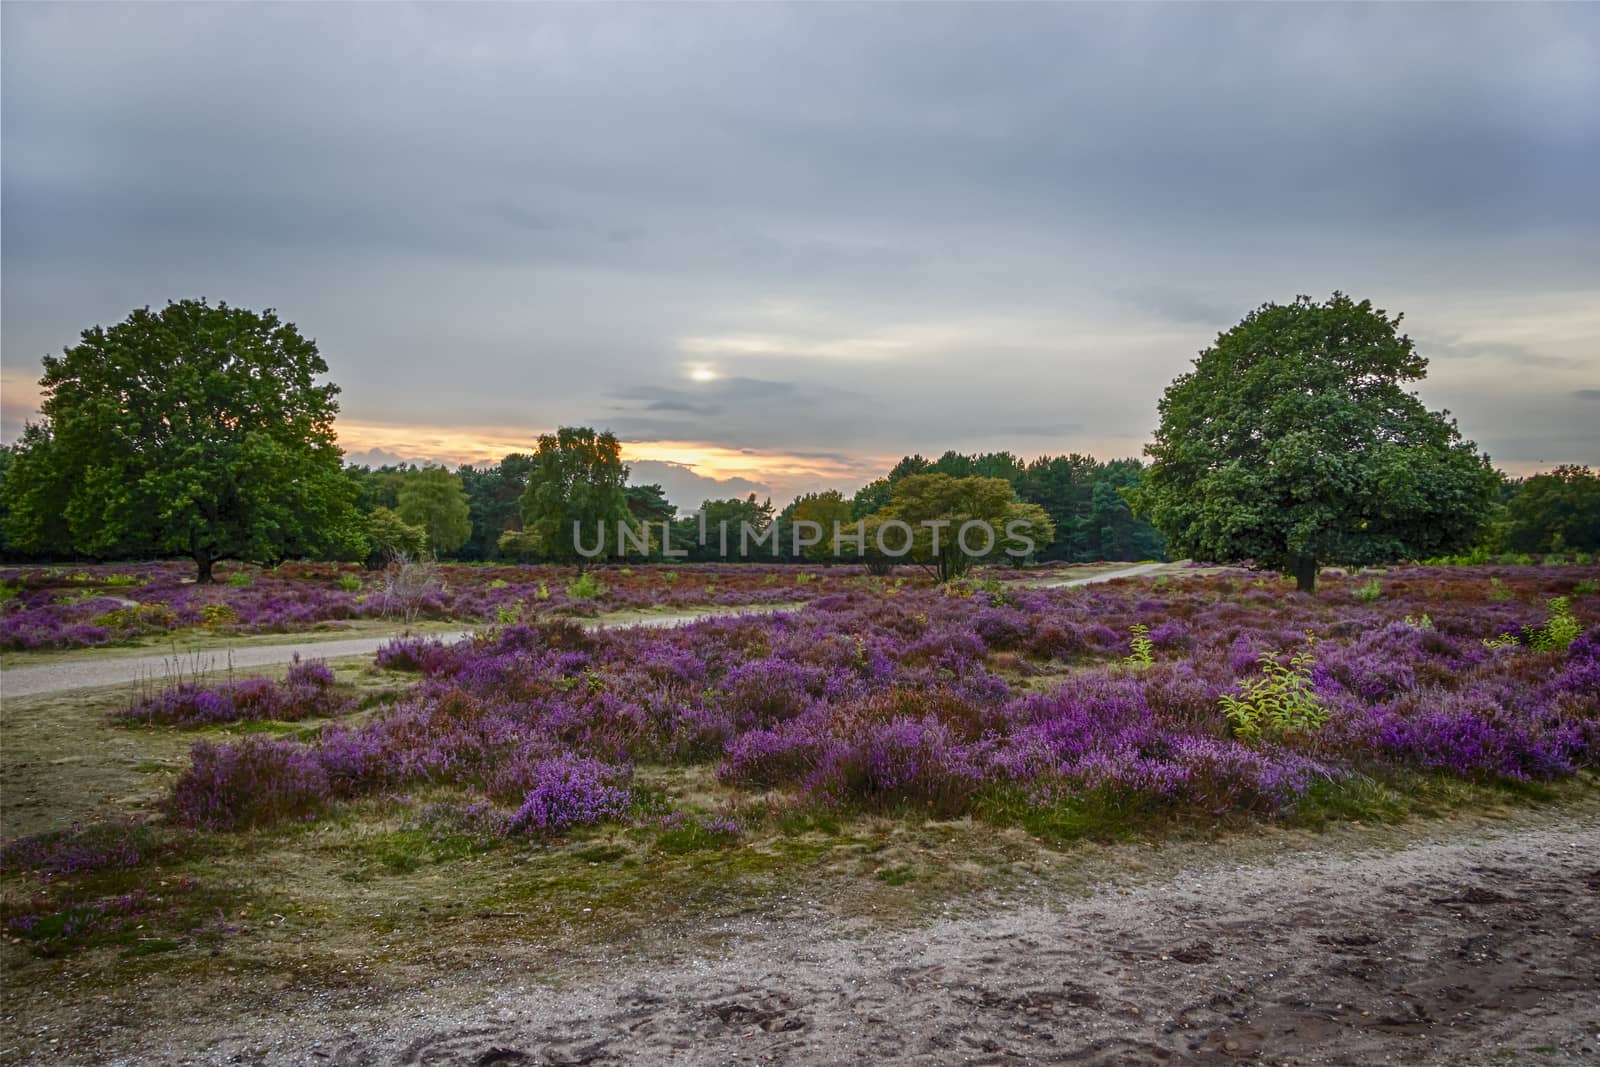 sunset over heather fields, the Netherlands